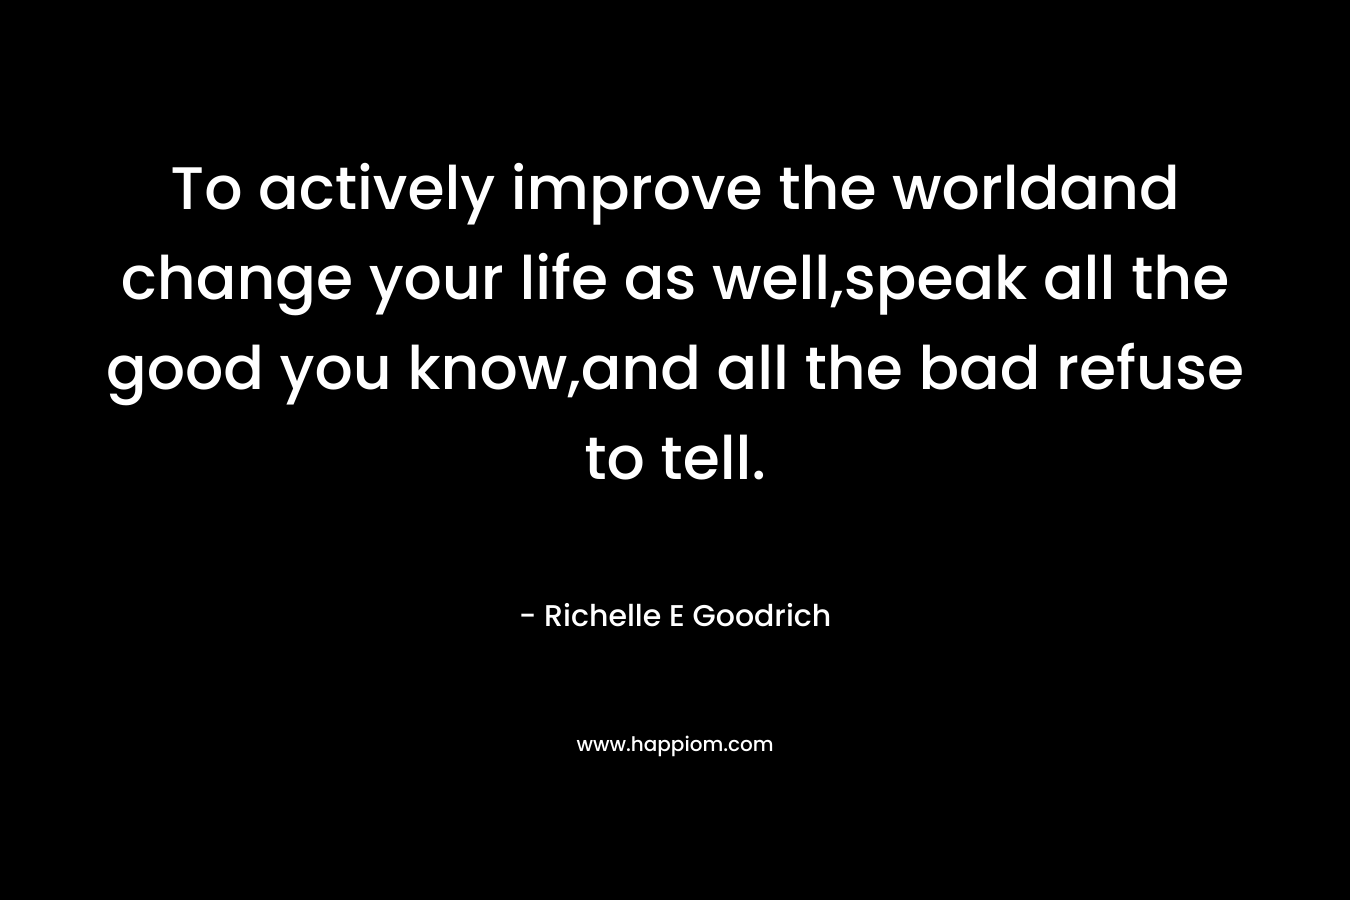 To actively improve the worldand change your life as well,speak all the good you know,and all the bad refuse to tell.